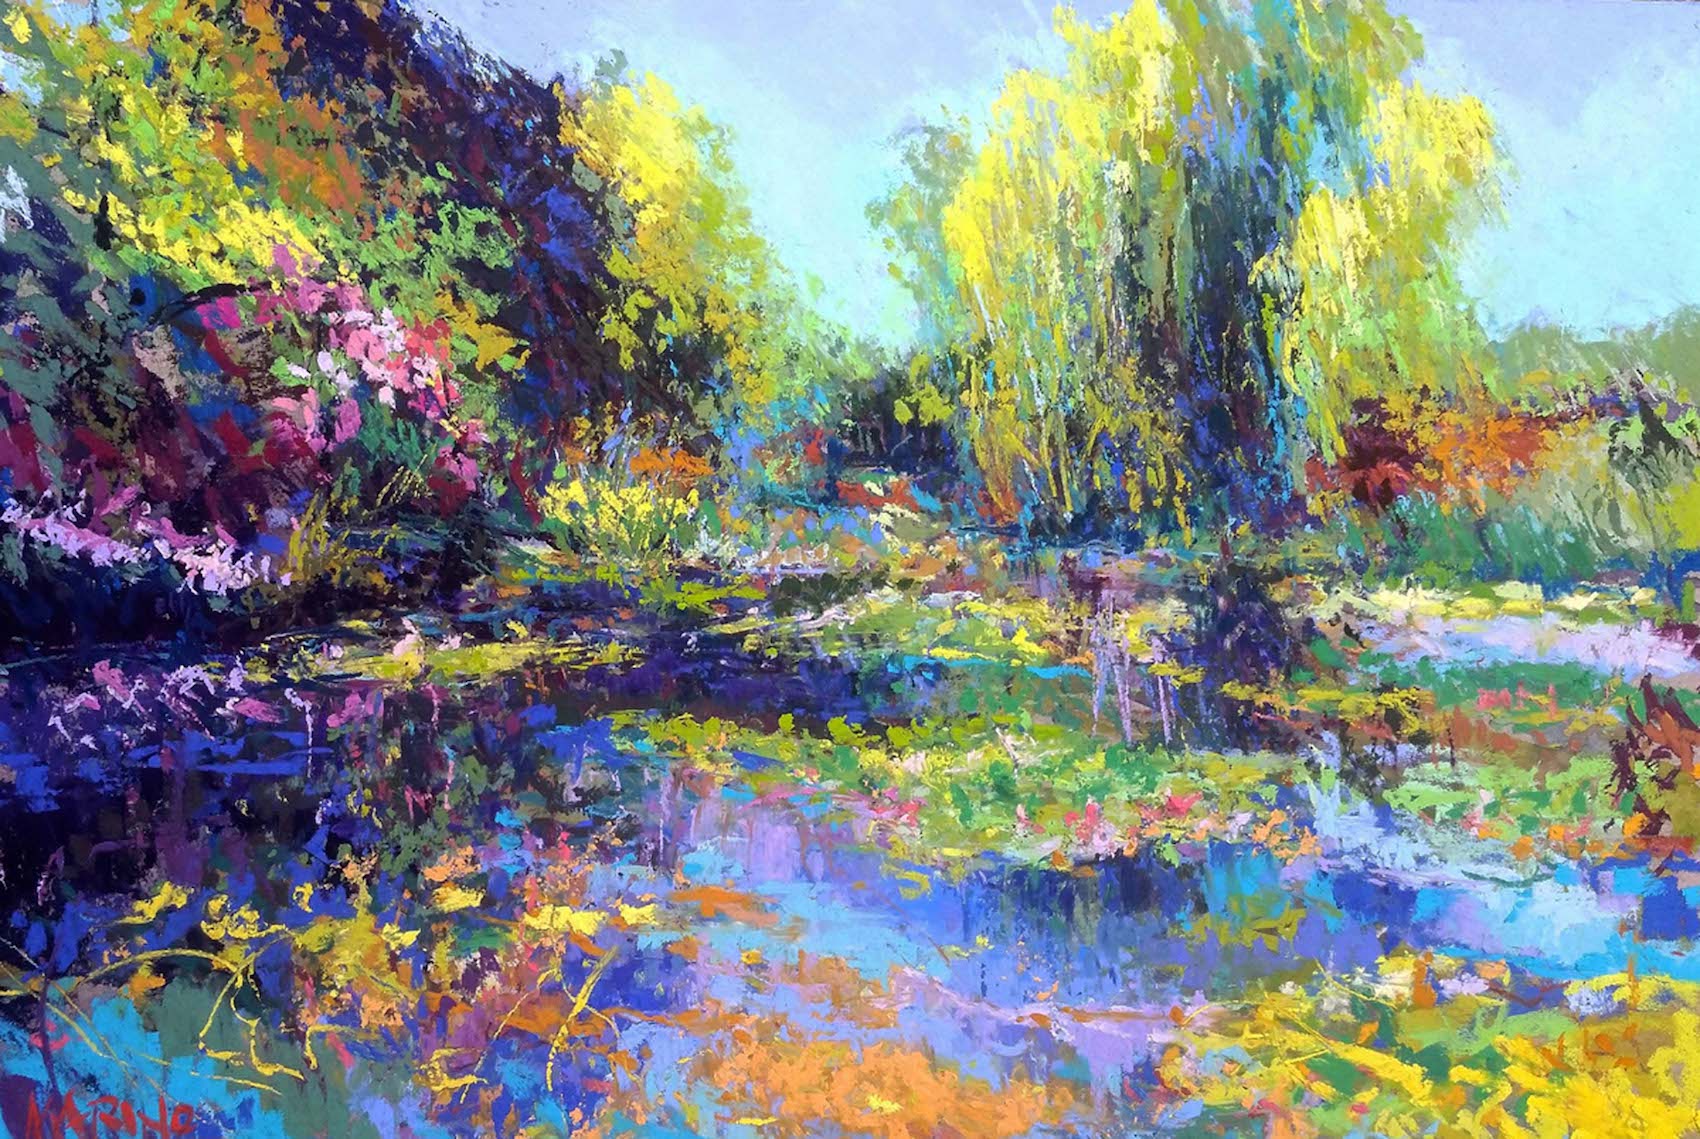 Maria Marino, "Soleil," pastel over watercolor on Wallis board, 12 x 18 in. Available. Painted from a photo of a view of Monet's Pond at Giverny.